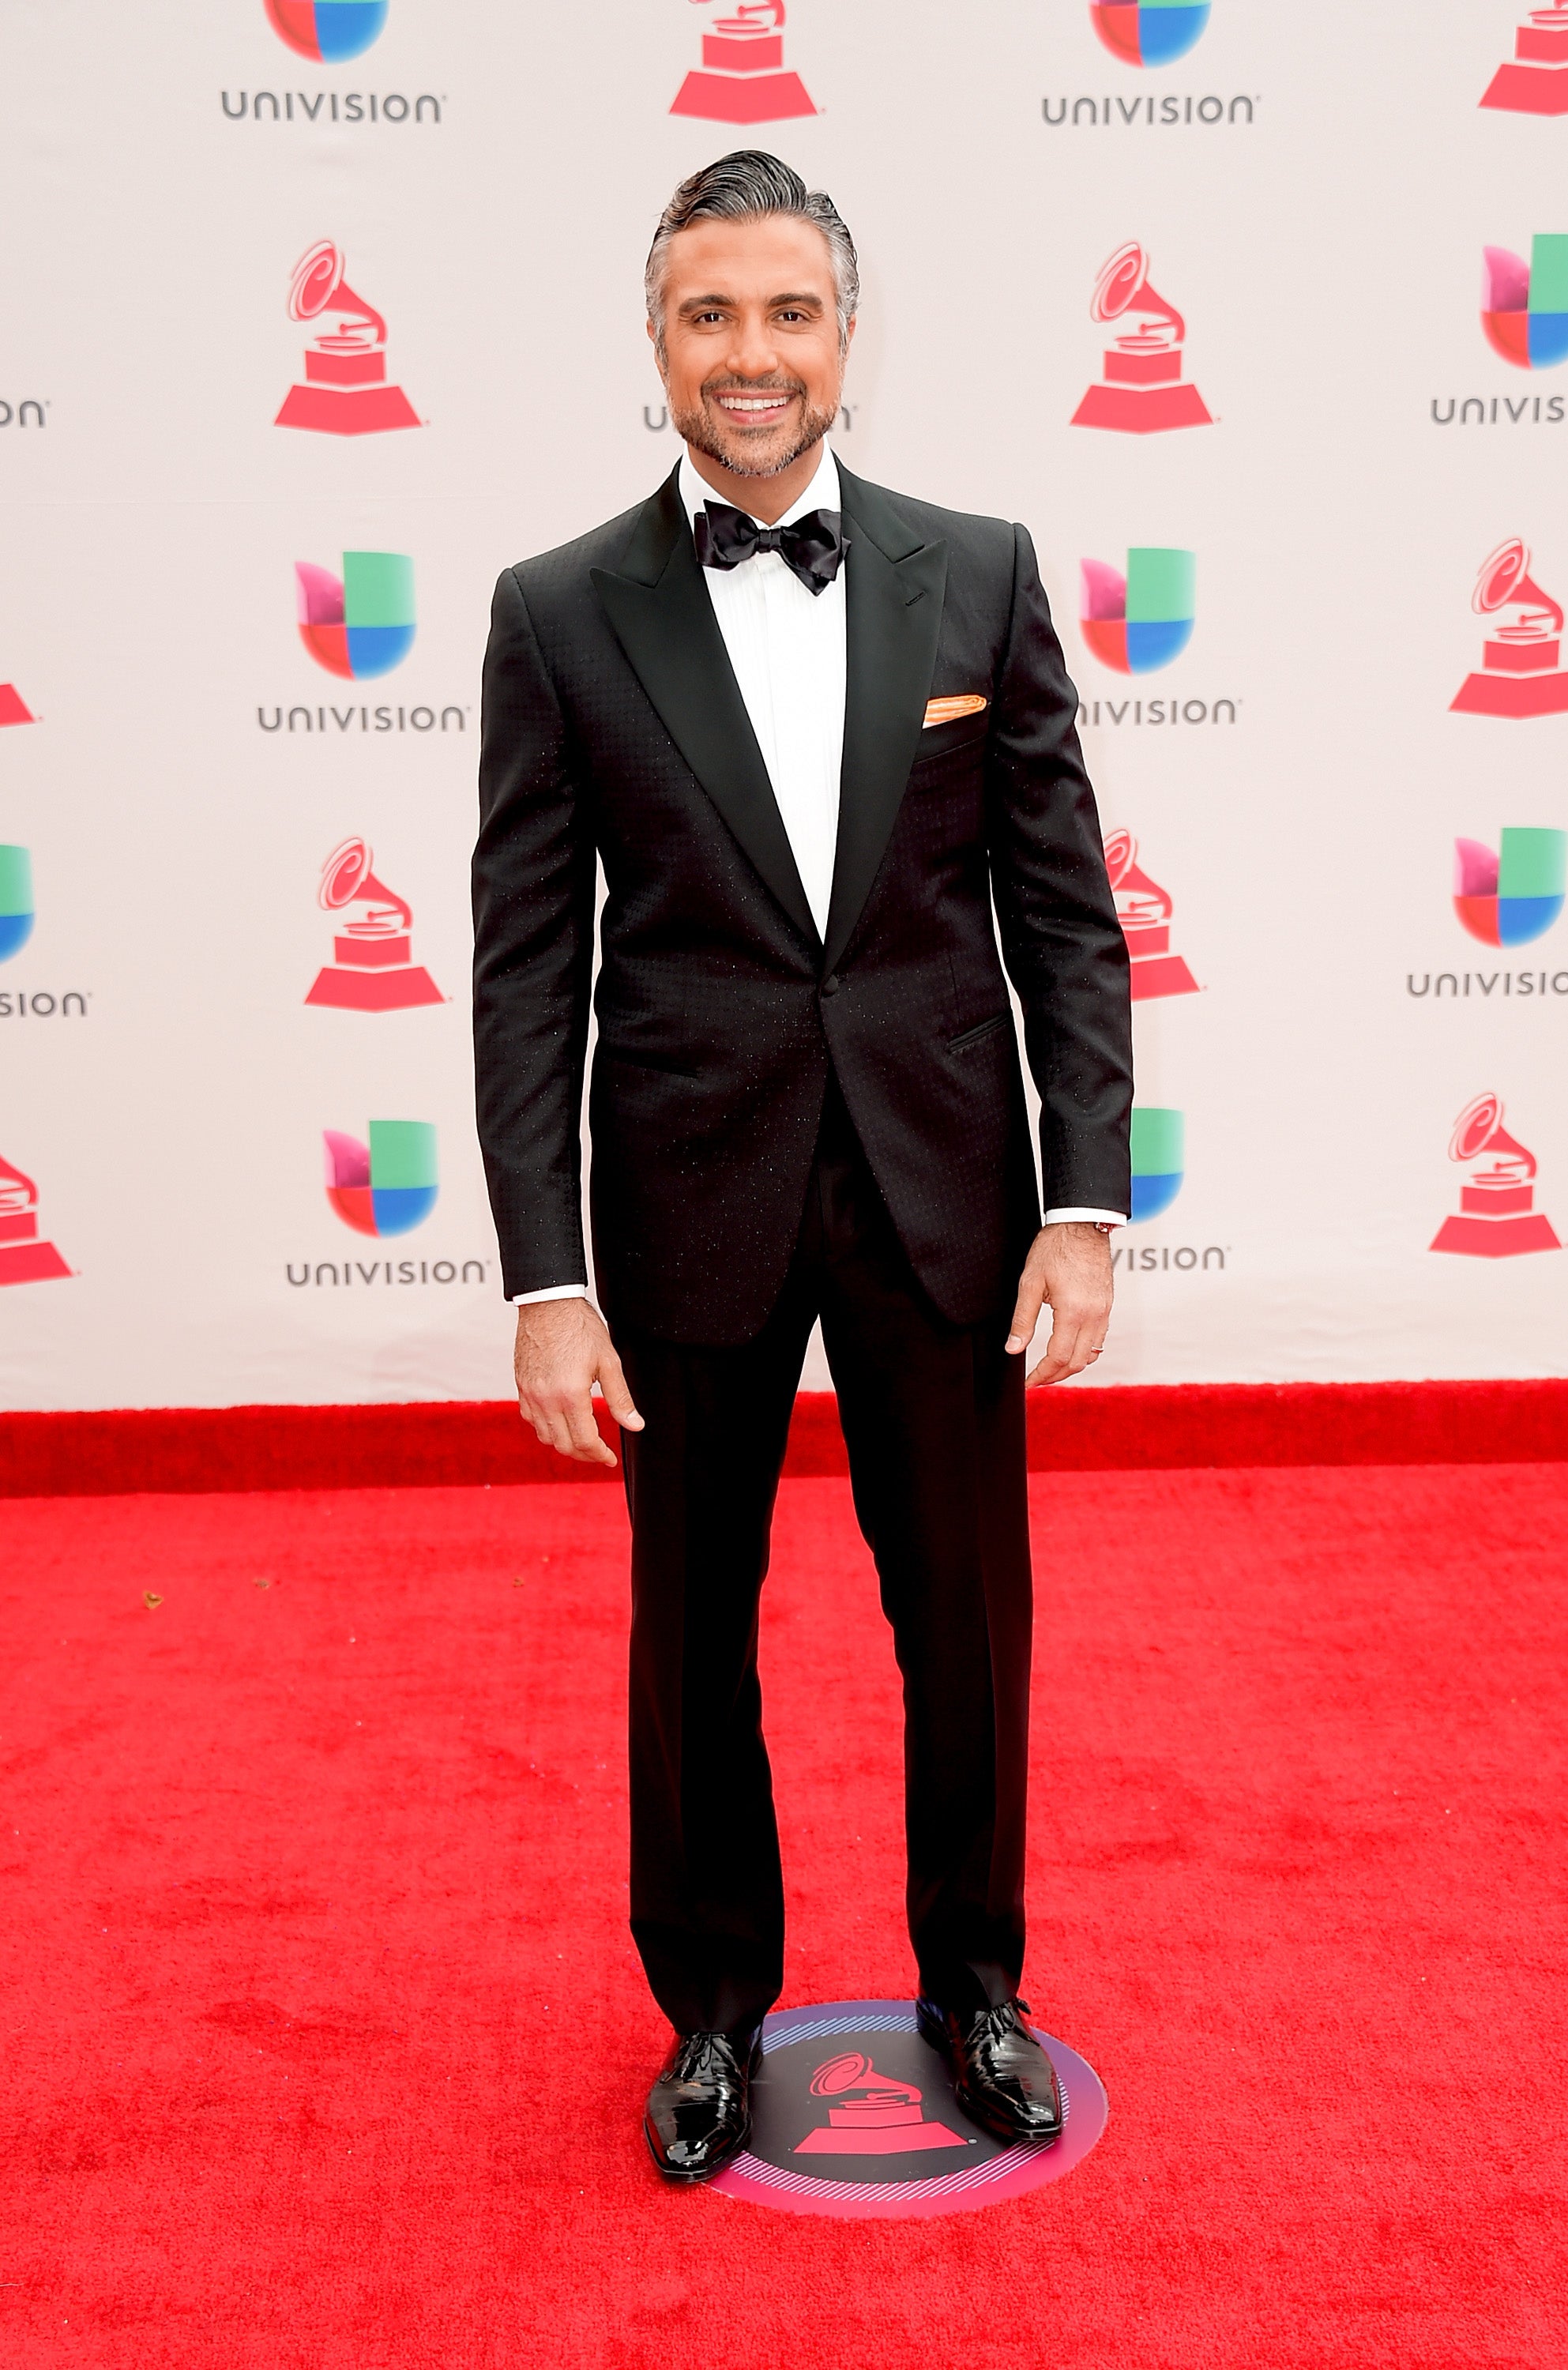 Latin Grammys Red Carpet 2017: See photos of what the stars are